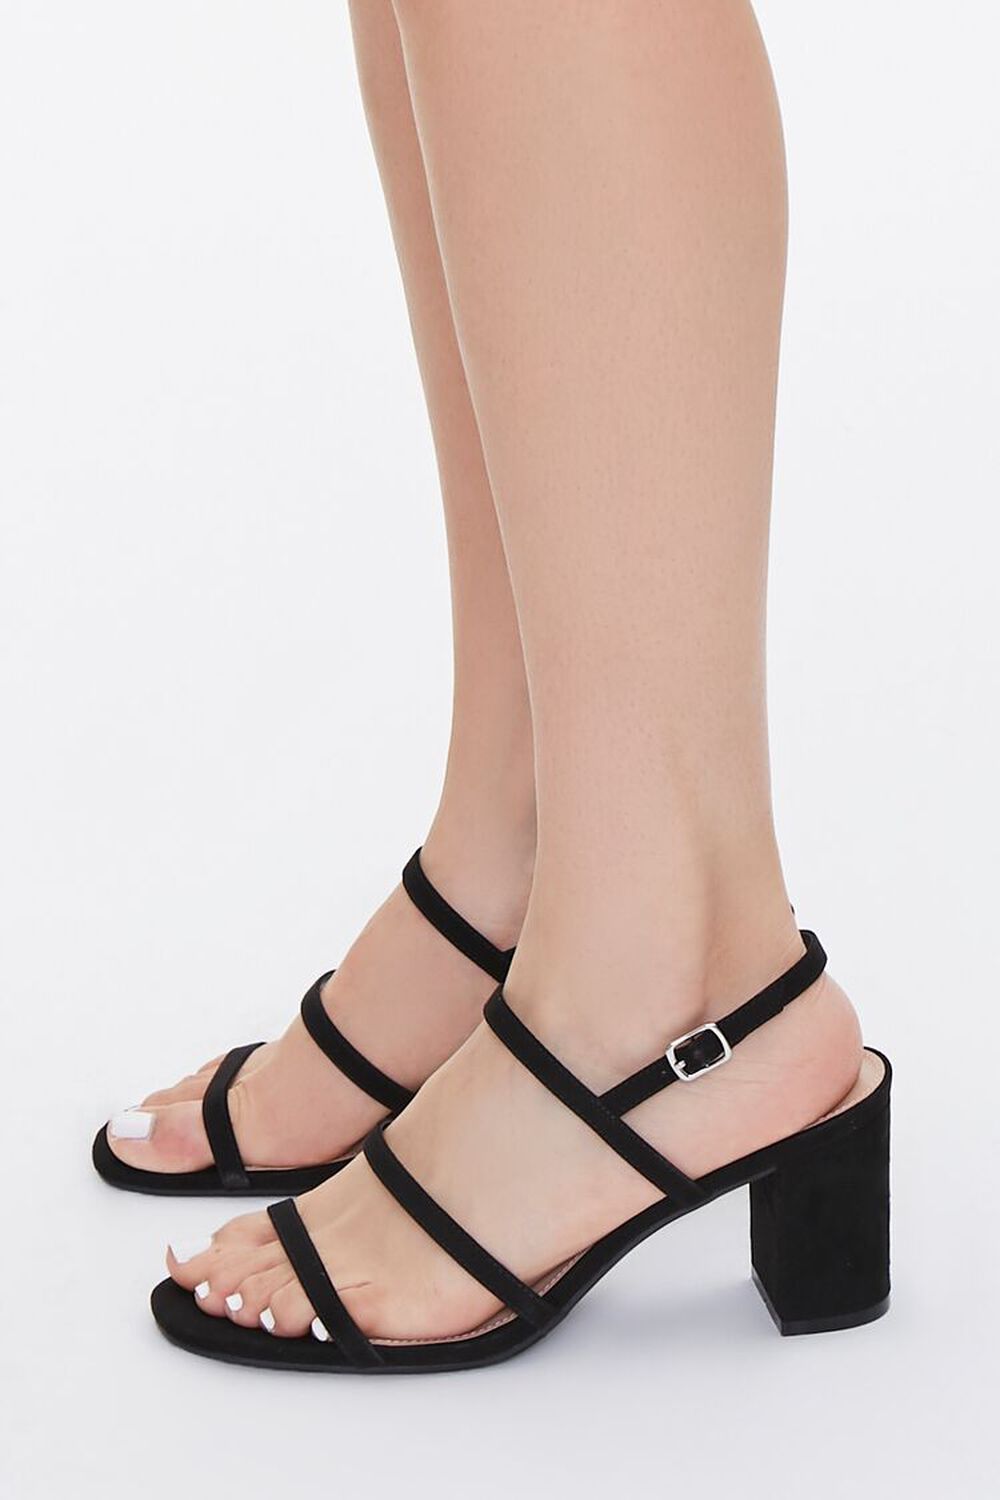 BLACK Strappy Faux Leather Block Heels, image 2